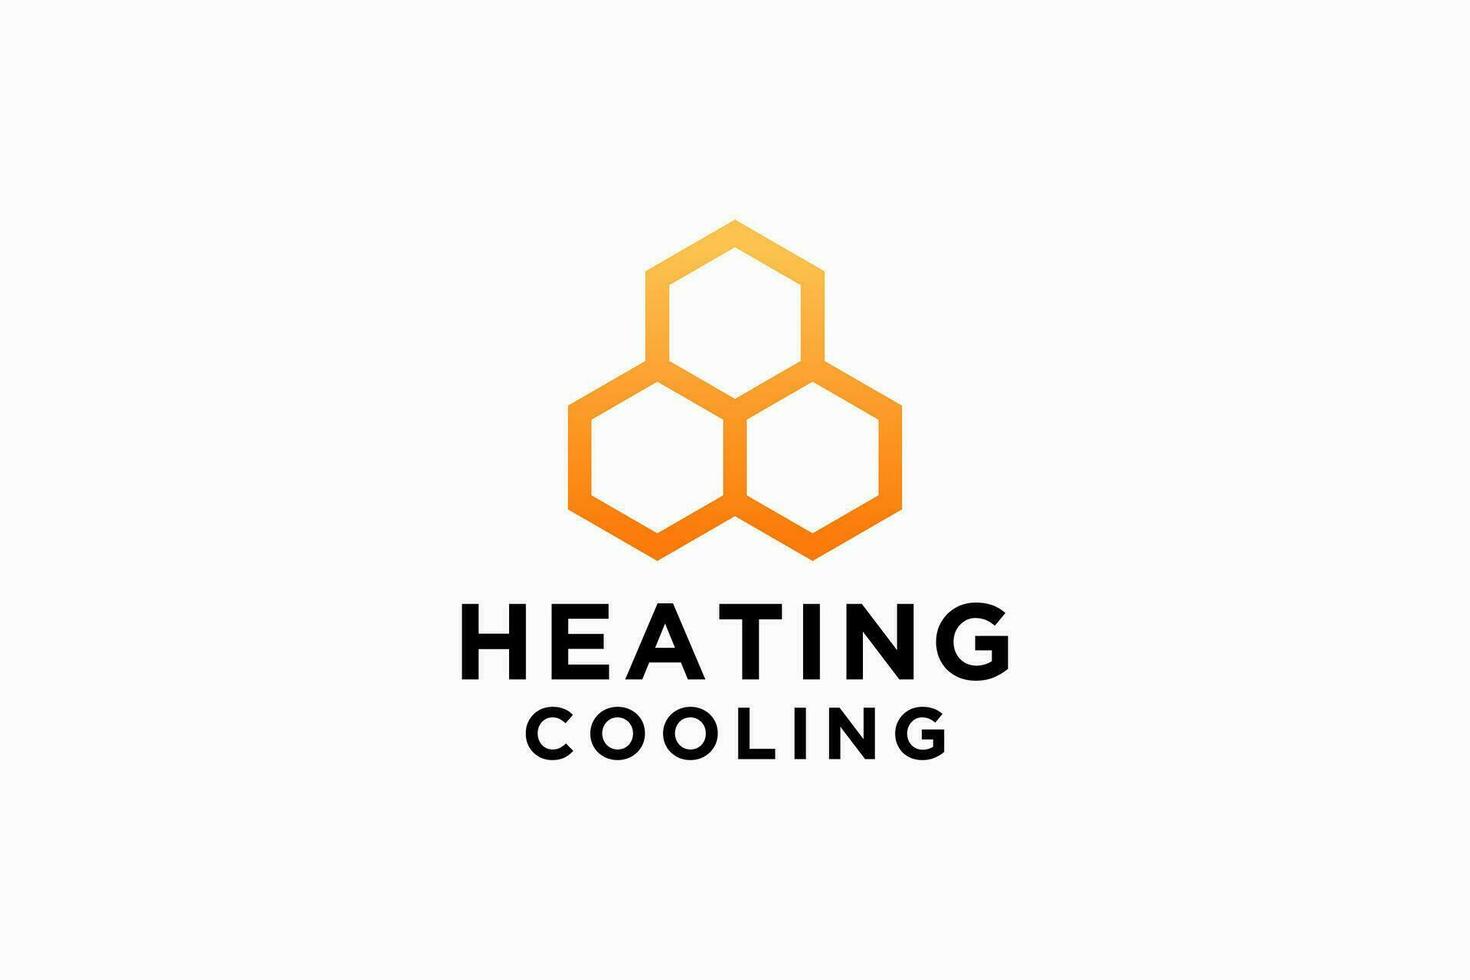 Illustration graphic vector of plumbing, heating and cooling service Logo Design template